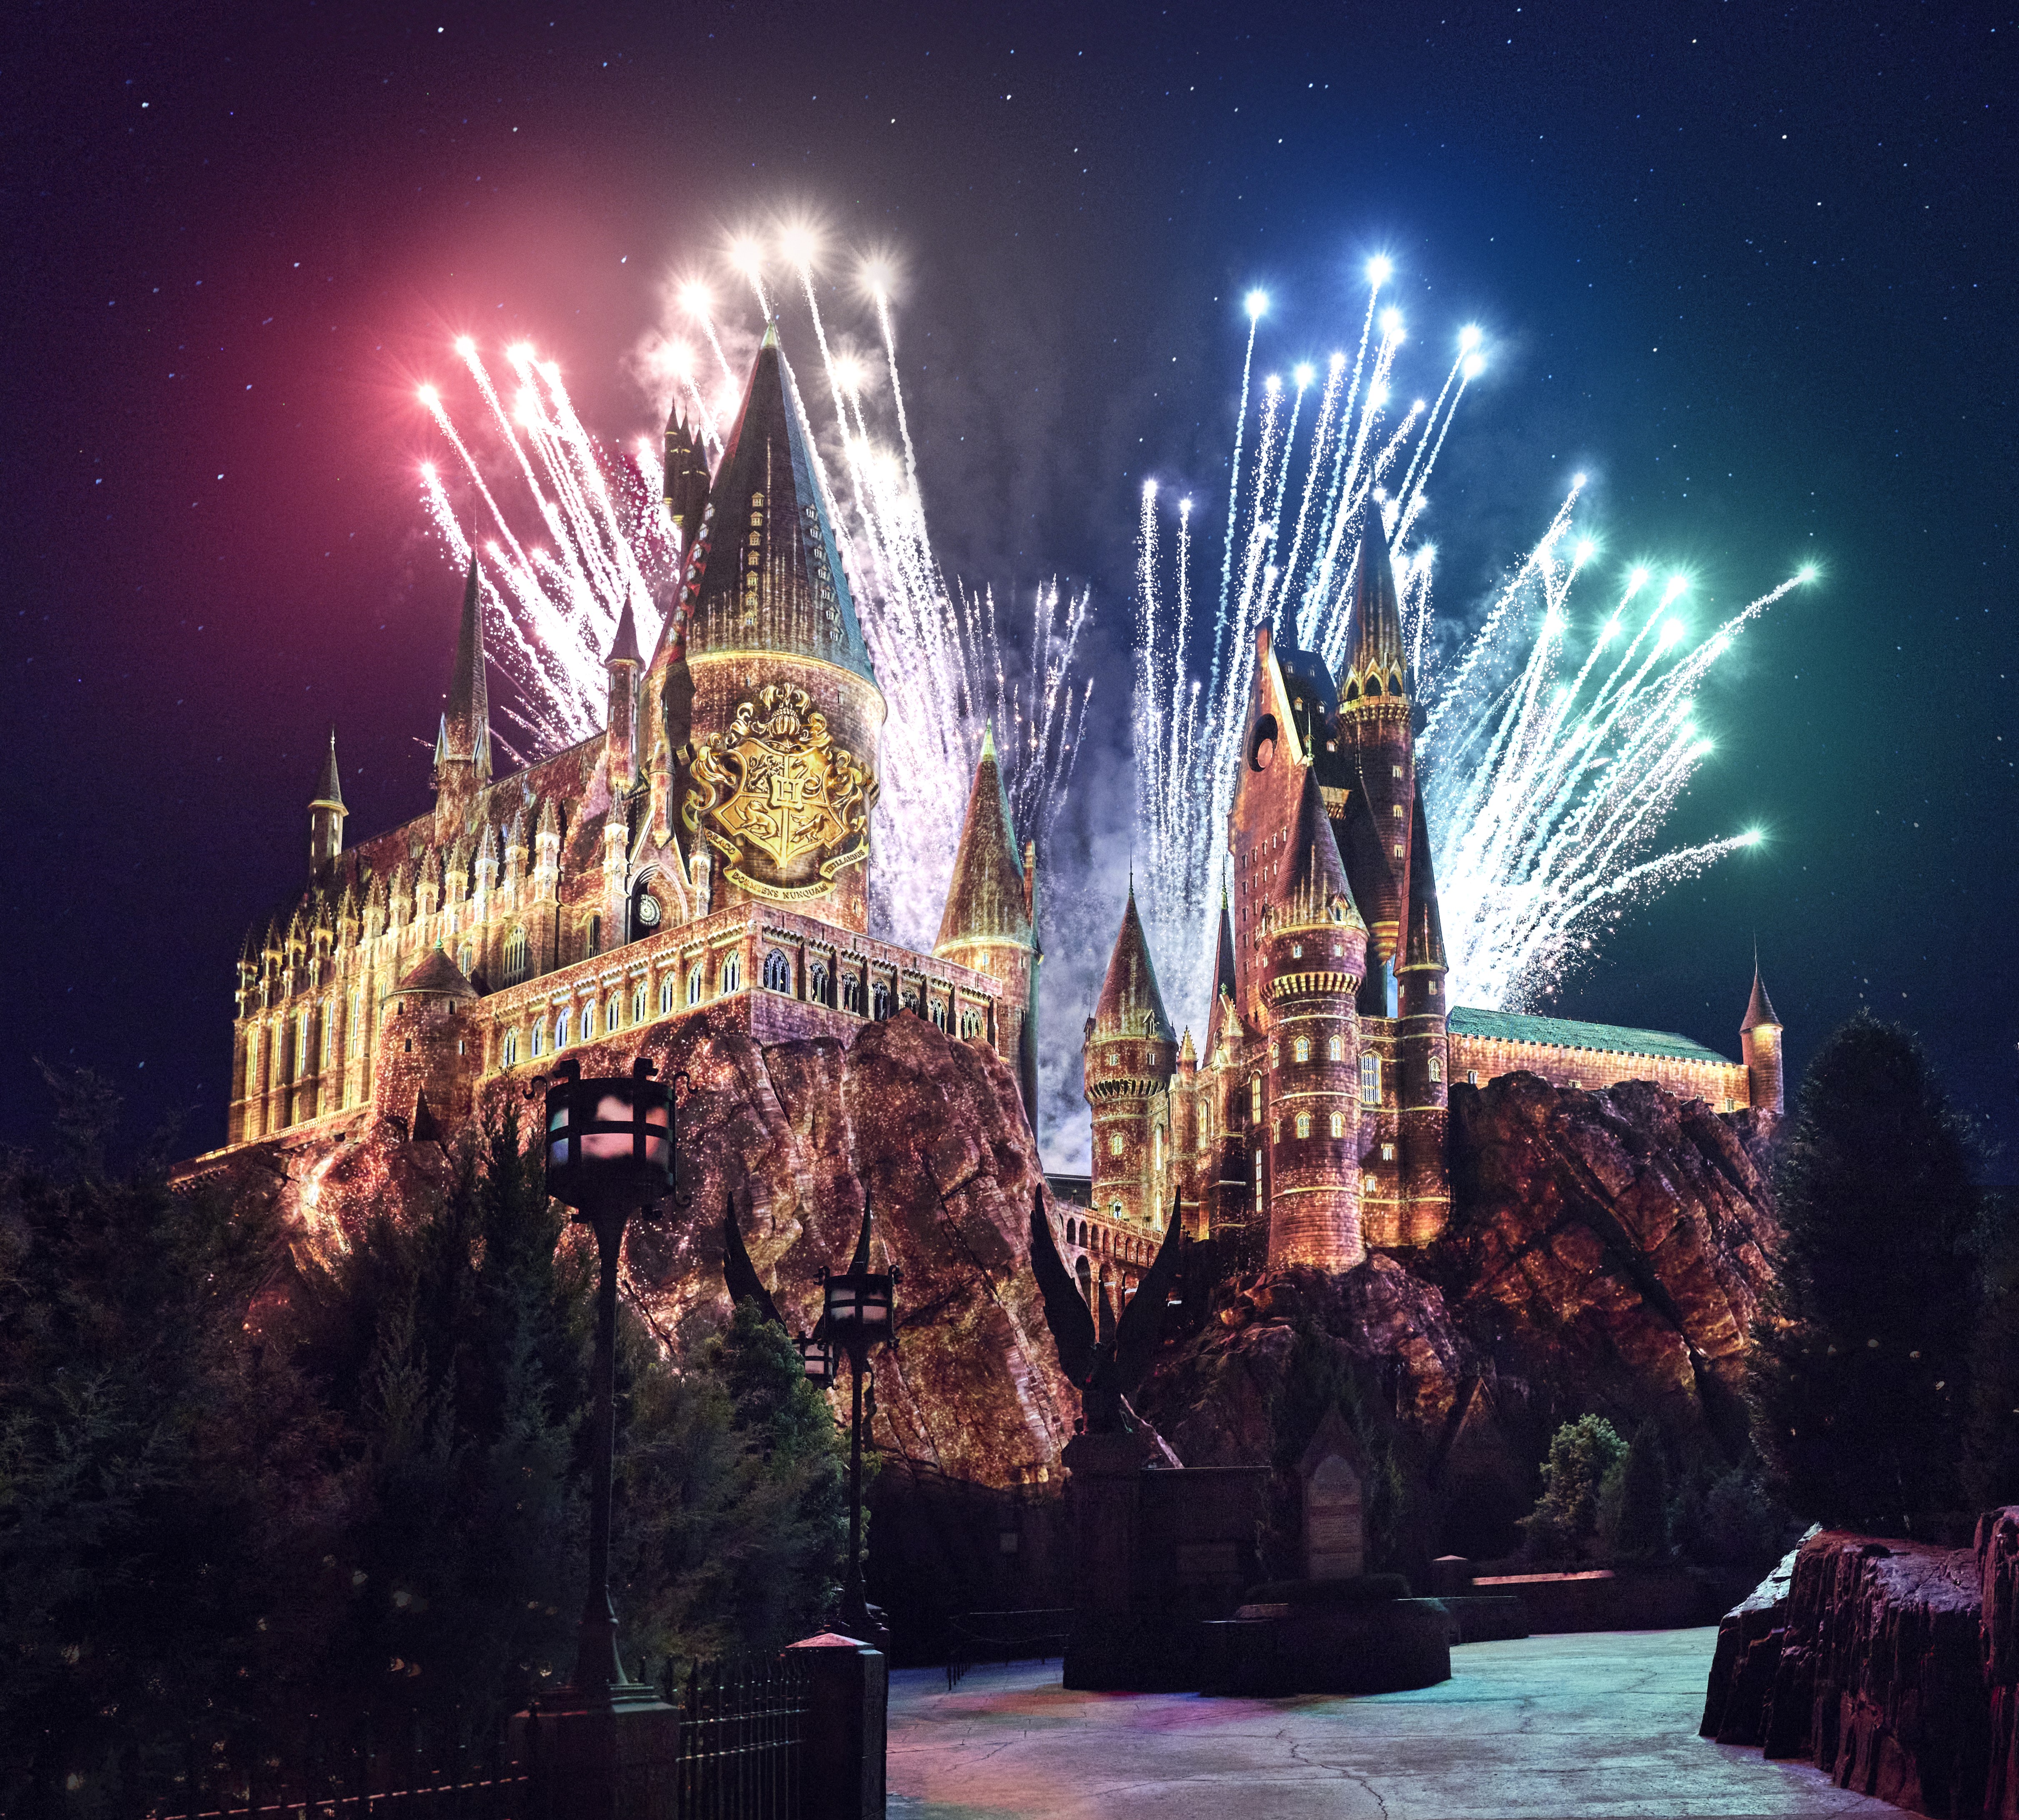 Universal Orlando Resort Reveals Exciting Collection of Experiences Debuting This Summer – Including an All-New Parade and Nighttime Lagoon Show Celebrating Iconic Films, A New Hogwarts Castle Projection Show in The Wizarding World Of Harry Potter, and More